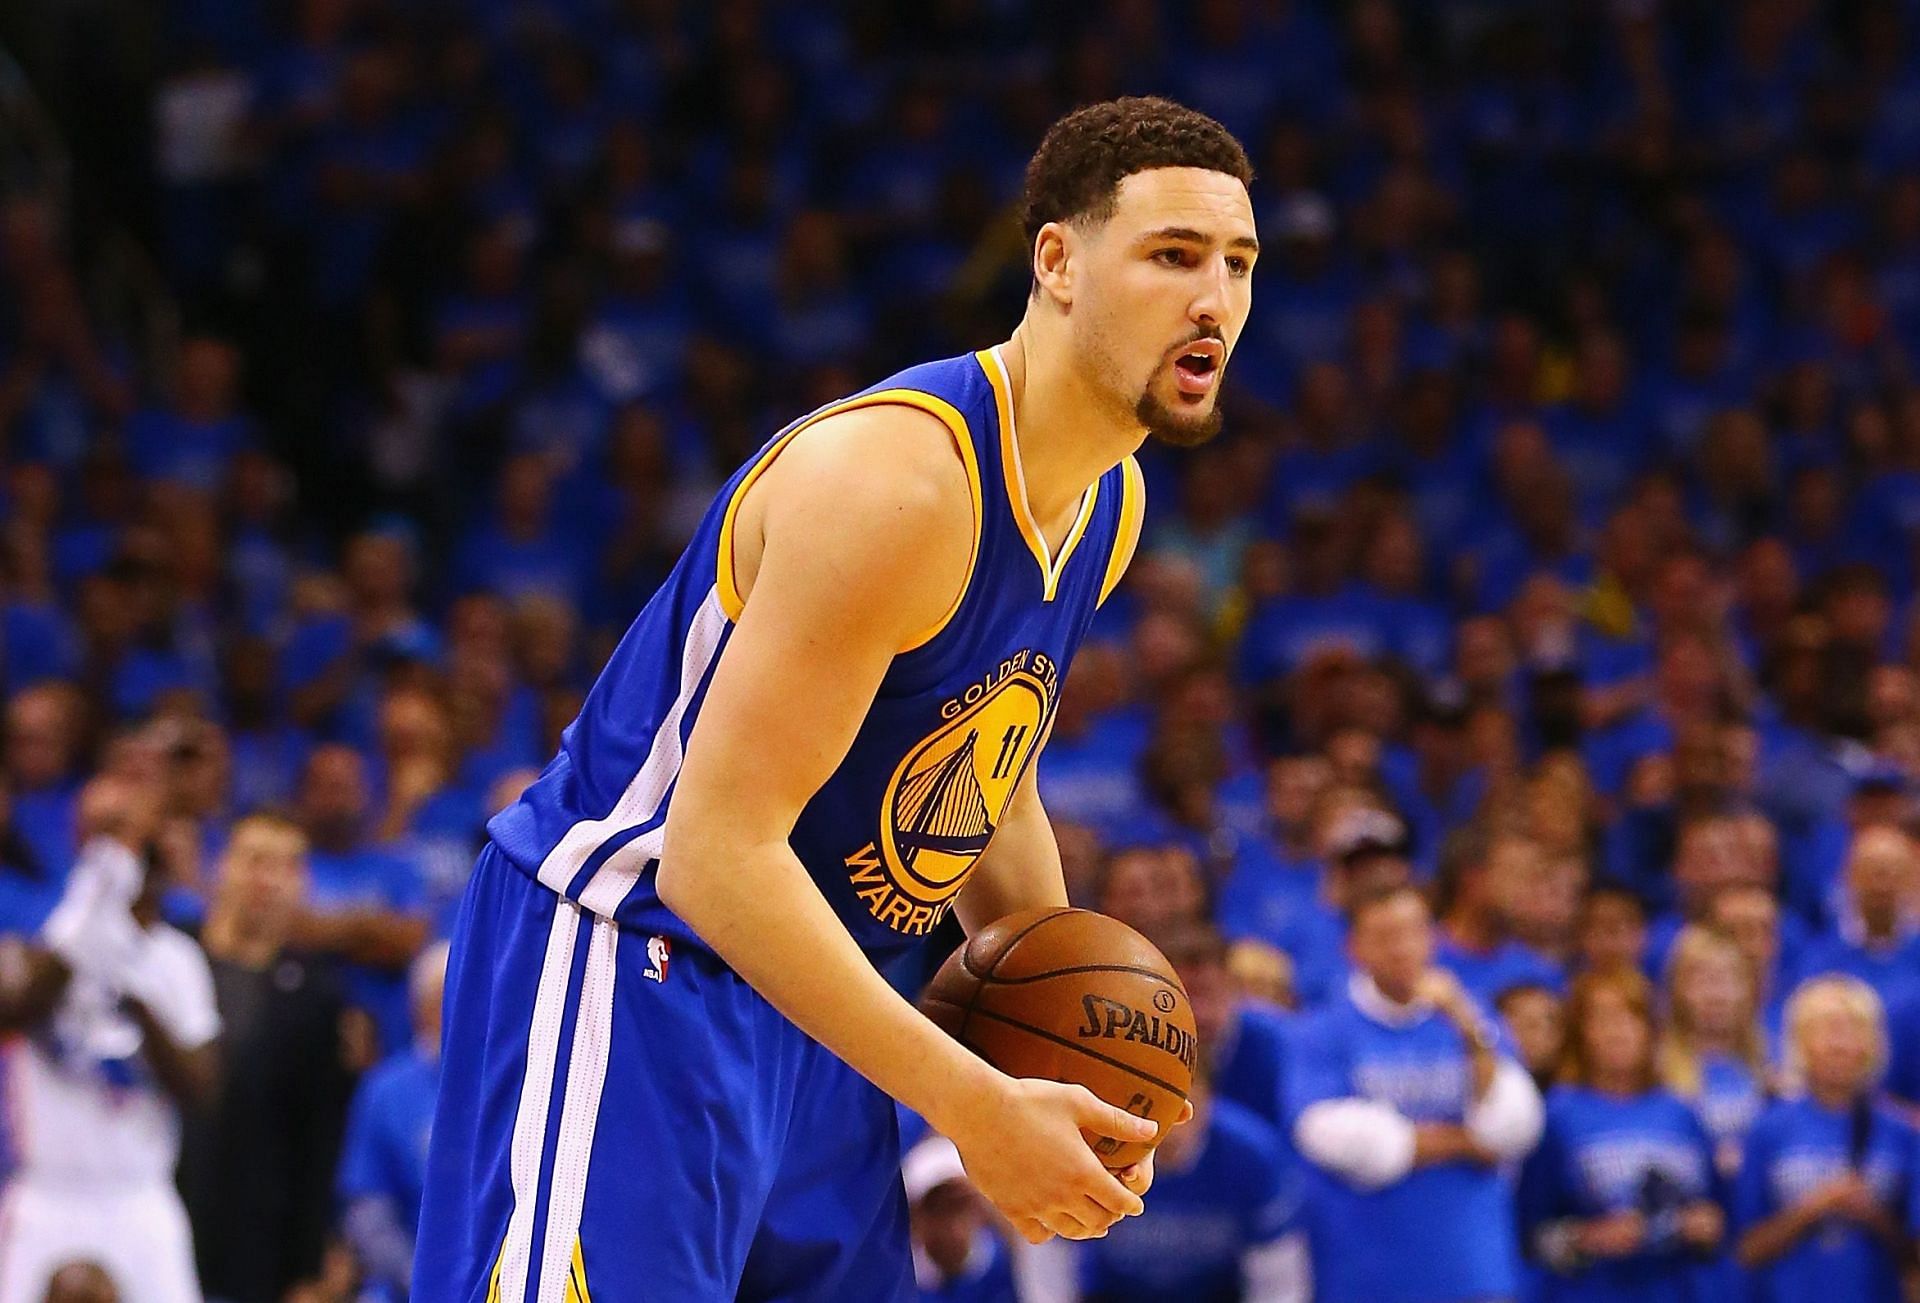 Klay Thompson of the Golden State Warriors during Game 6 of the 2016 Western Conference Finals.